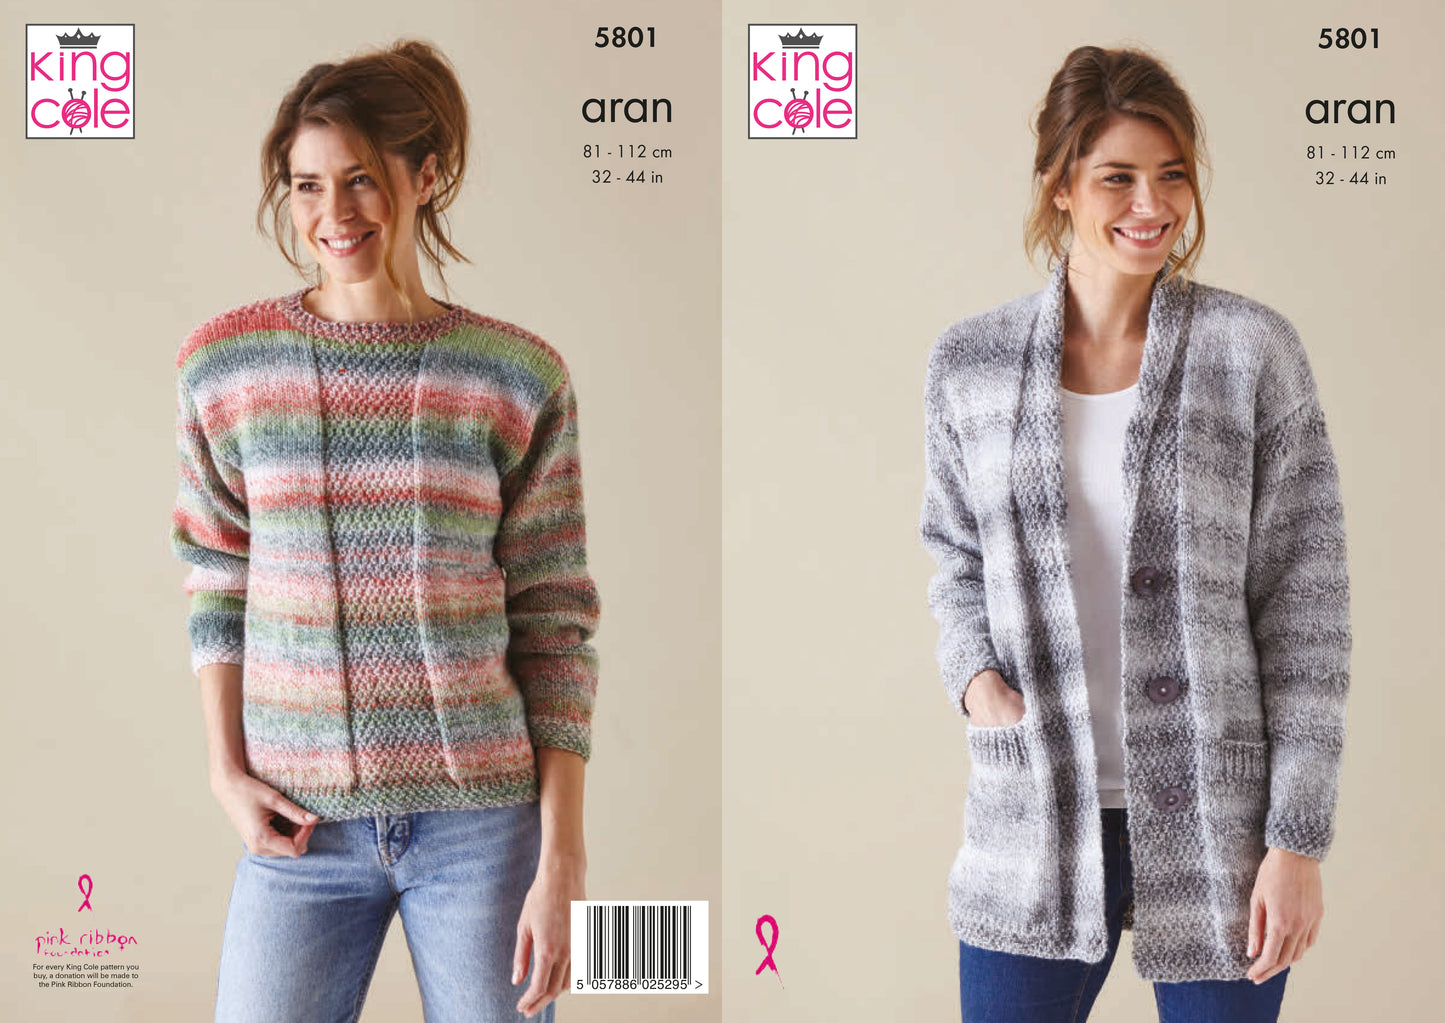 King Cole Acorn Pattern 5801 - Cardigan and Sweater